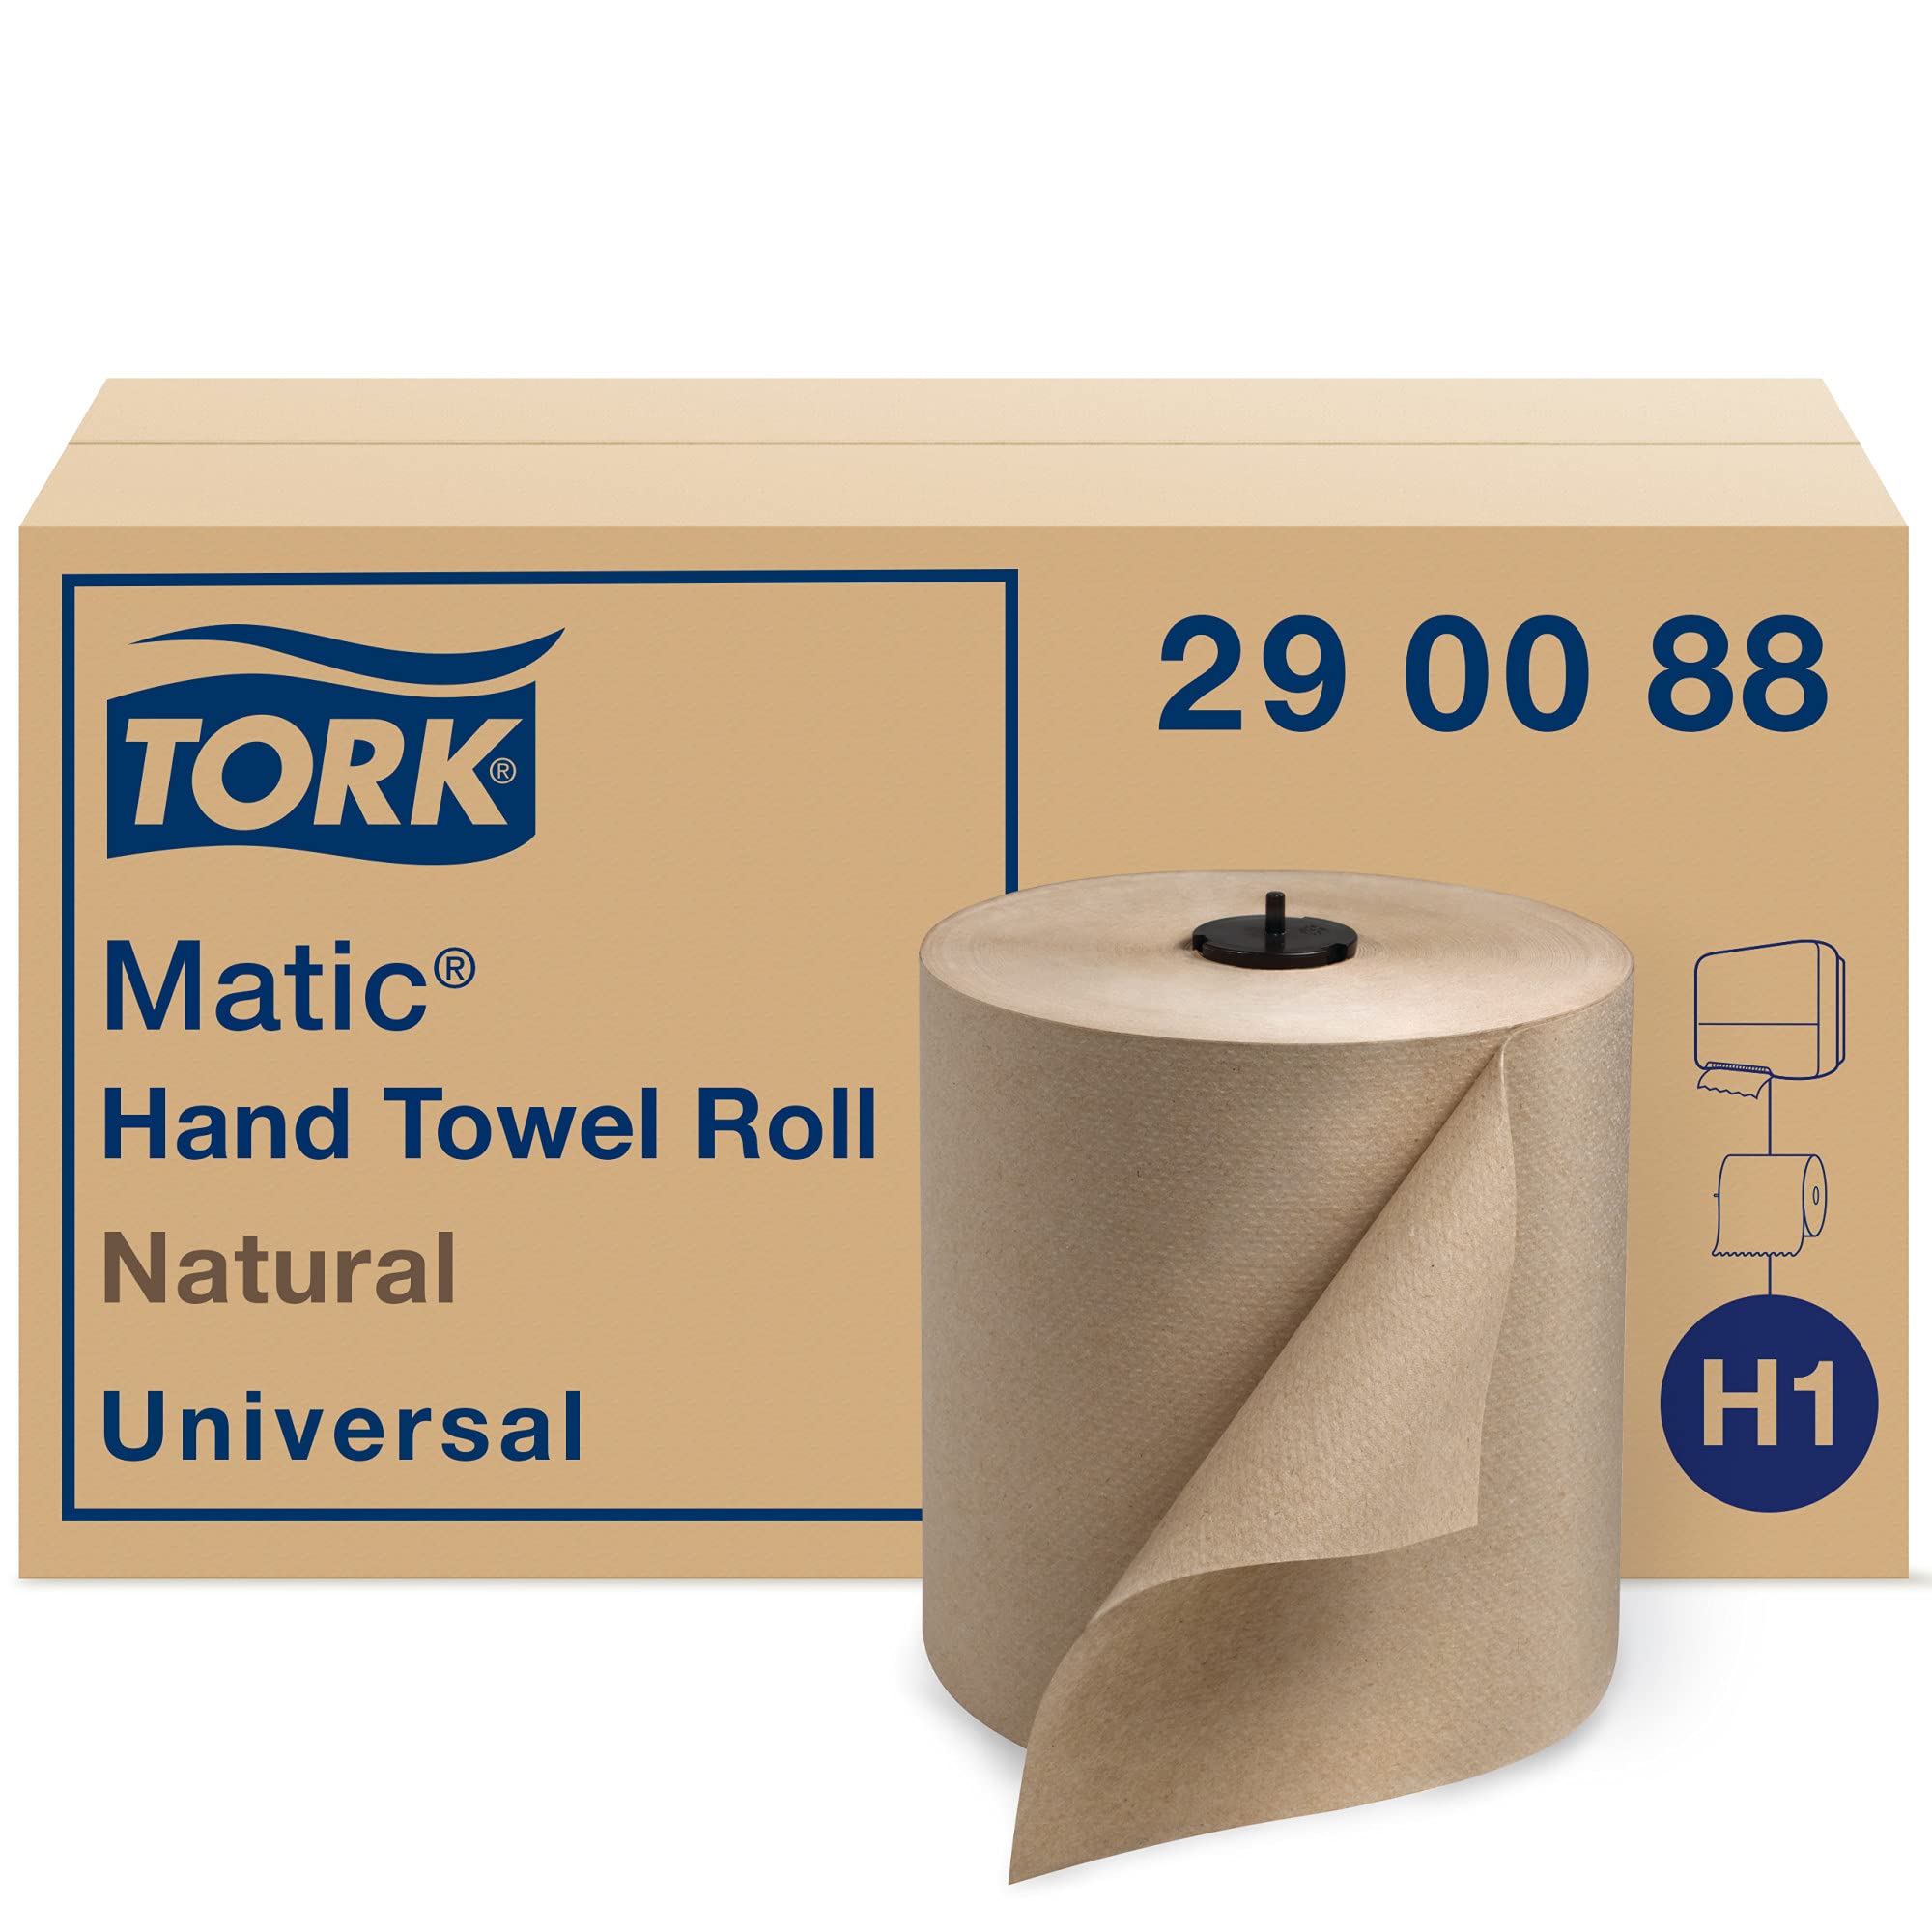 Tork Matic Advanced Paper Towel Roll H1, Paper Hand Towel 290089, 100% Recycled Fiber, High Absorbing, High Capacity 1-Ply, White - 6 Rolls x 700 ft